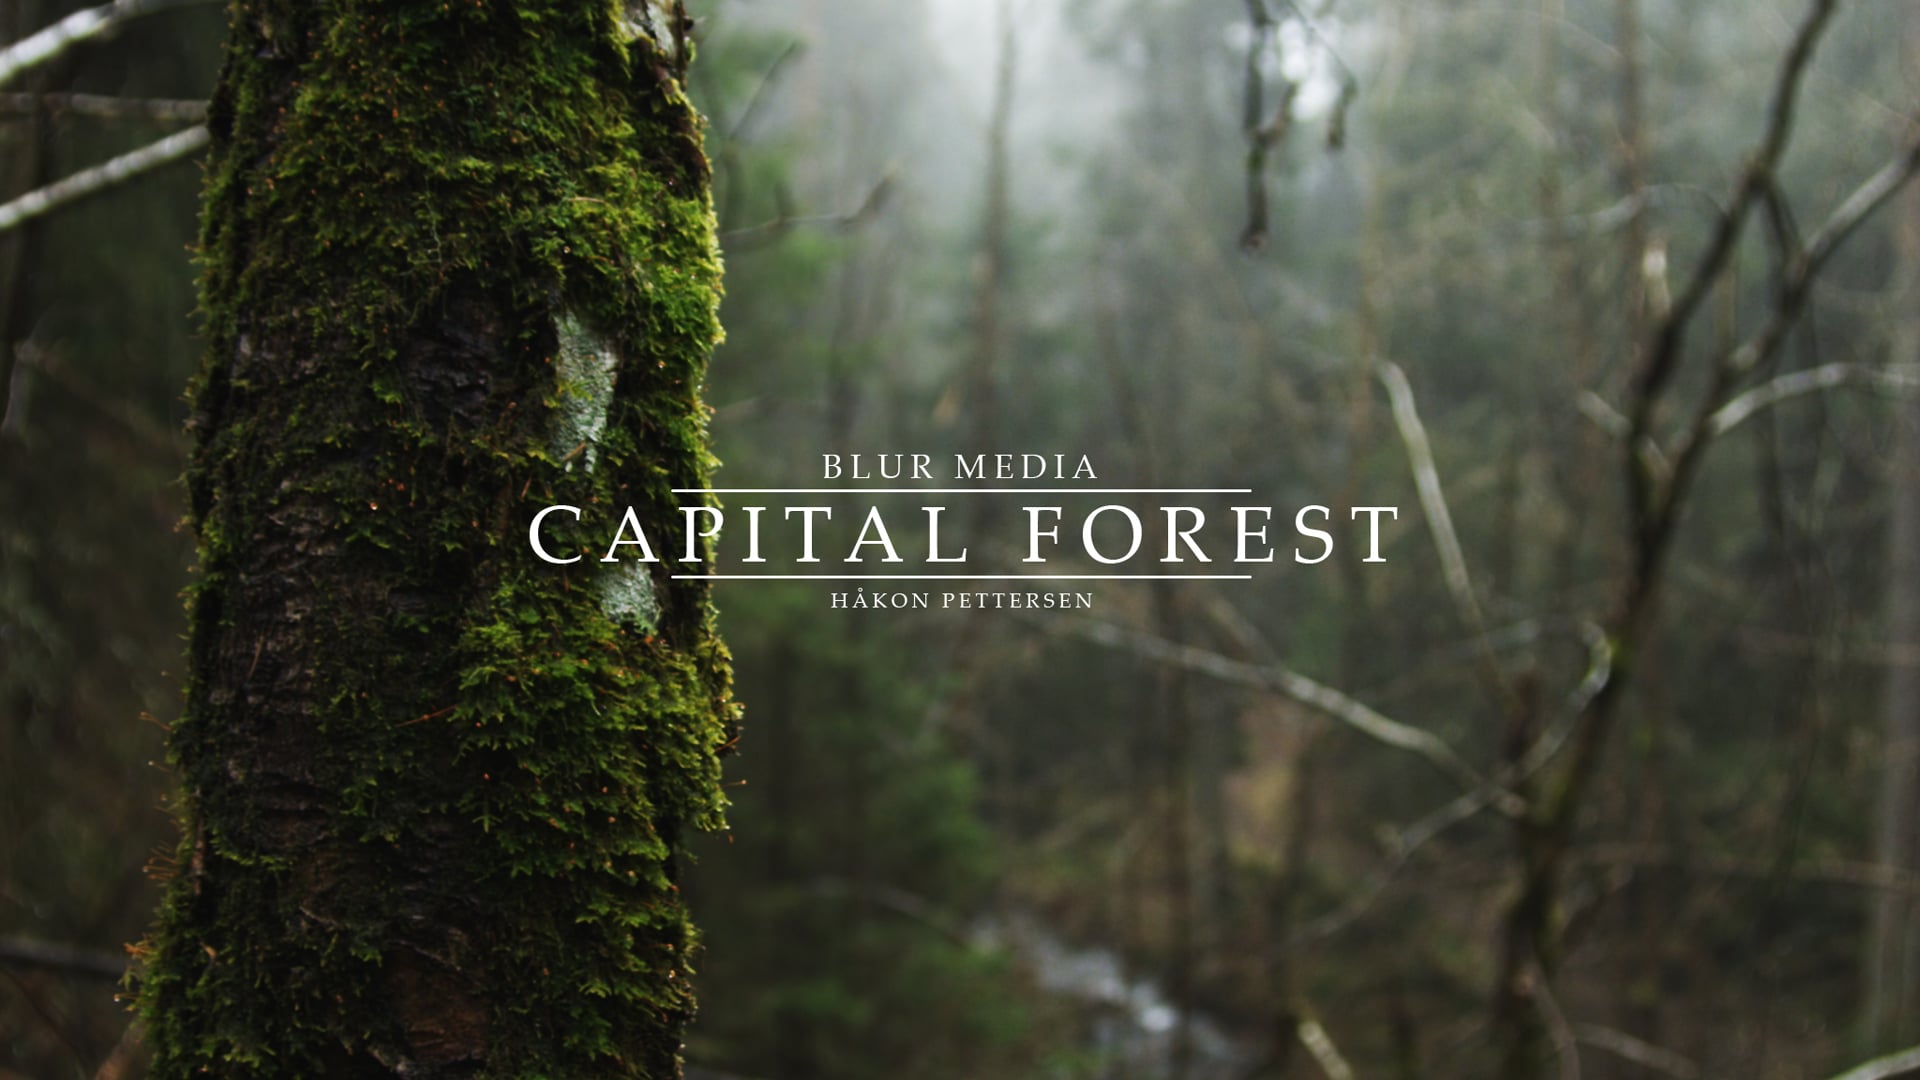 "Capital Forest"